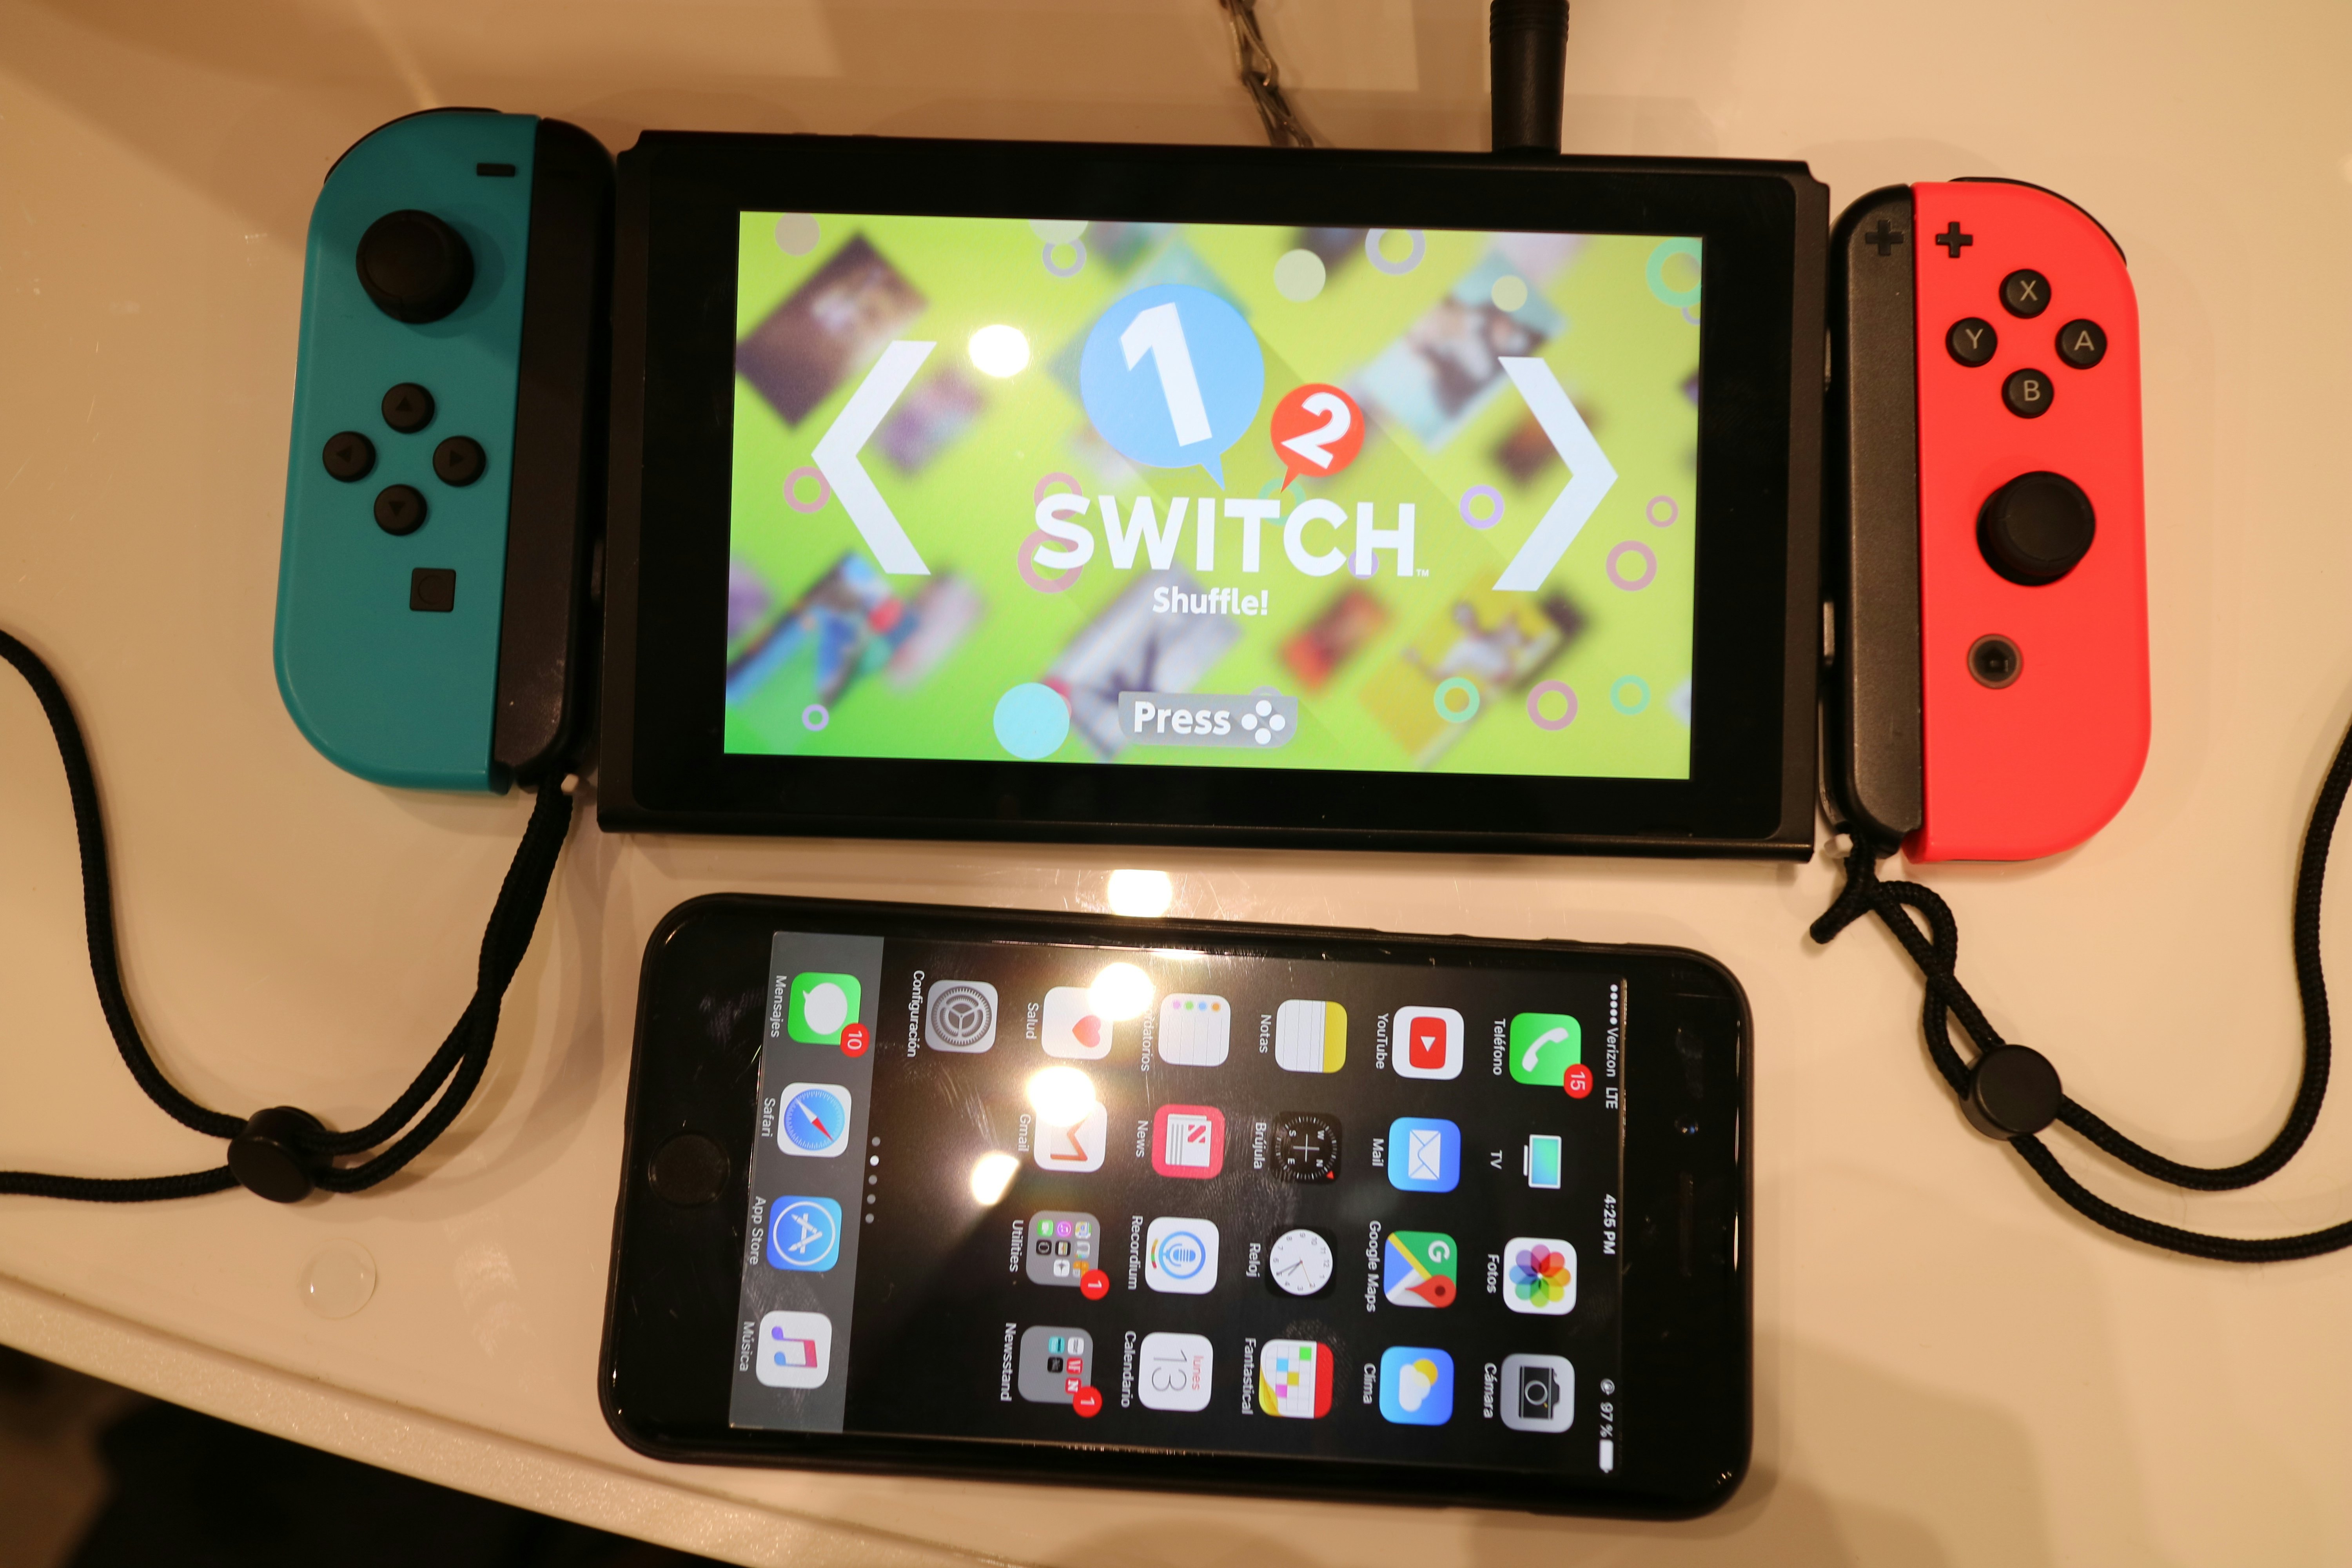 wii u controller with switch